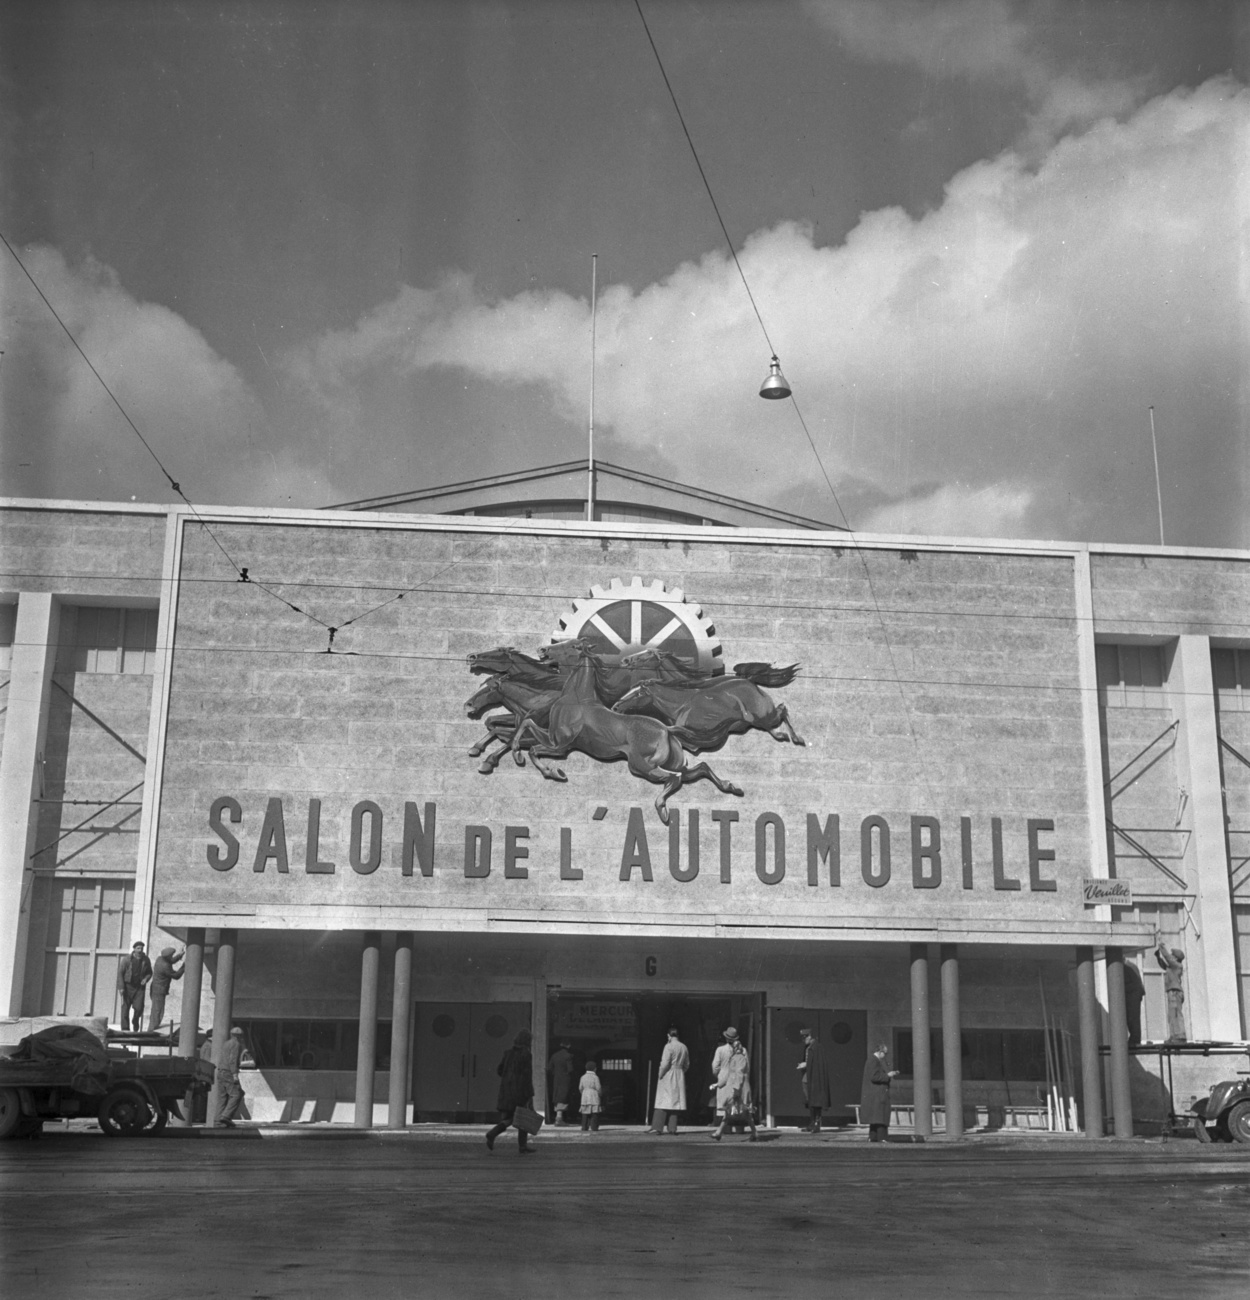 The entrance to the 17th Geneva International Motor Show in March 1947.